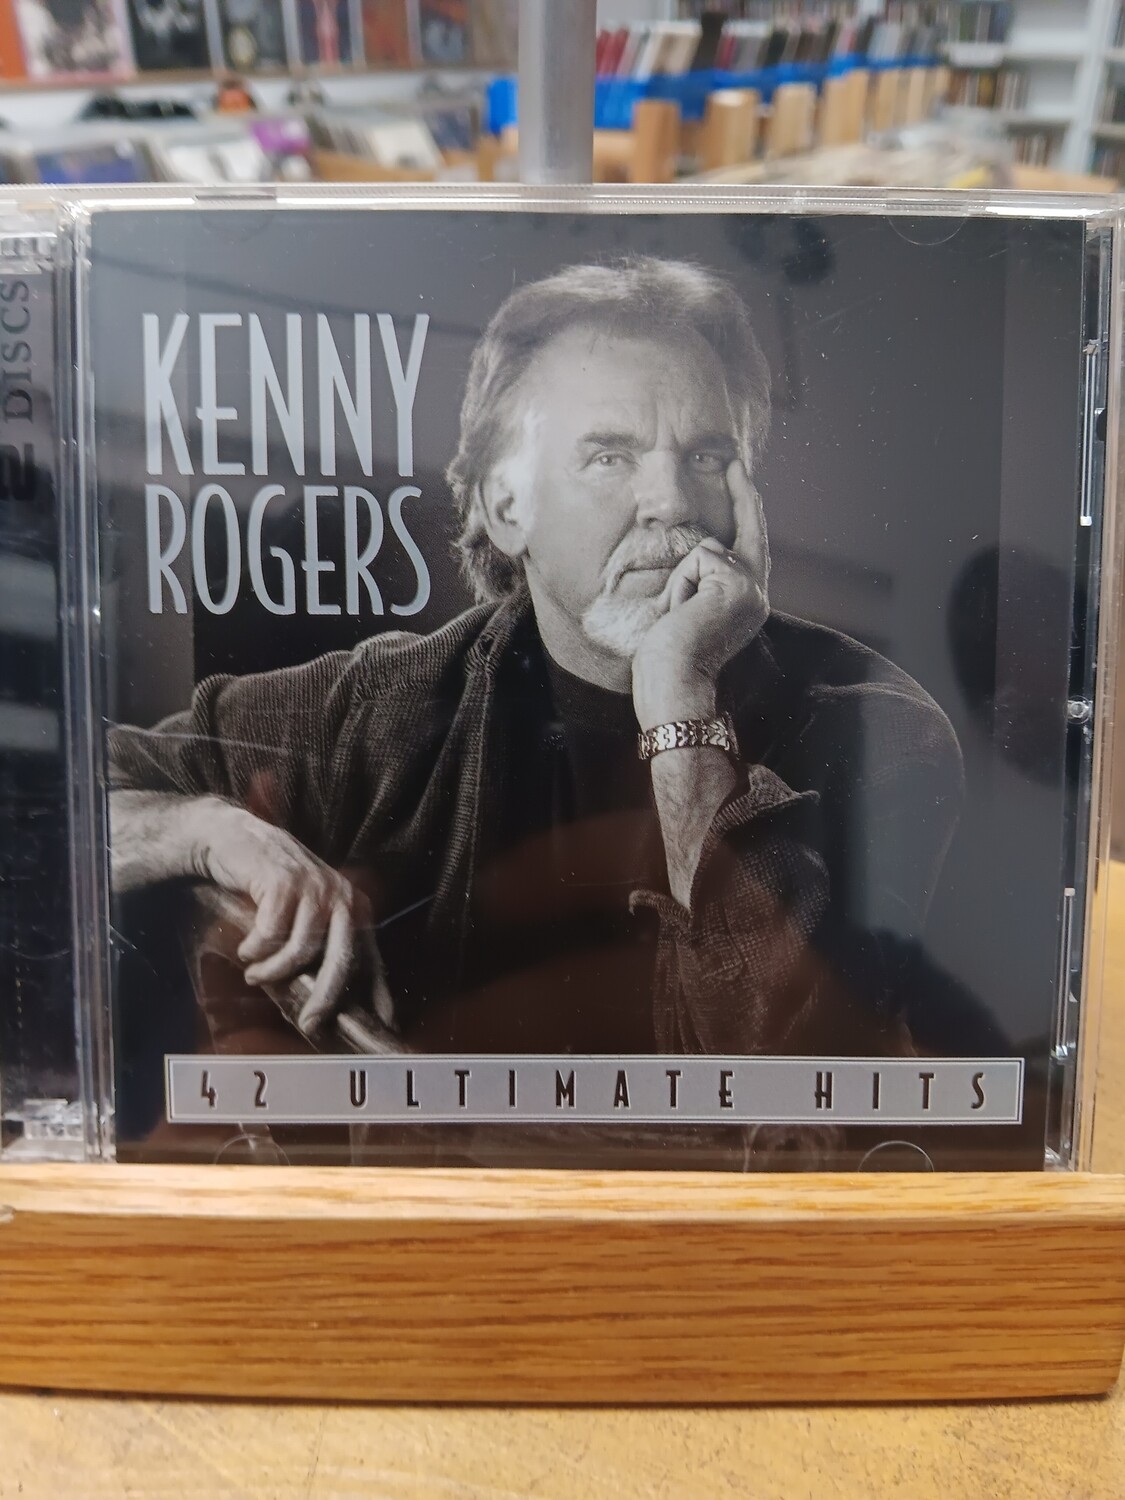 KENNY ROGERS - 42 Ultimate Hits (CD)